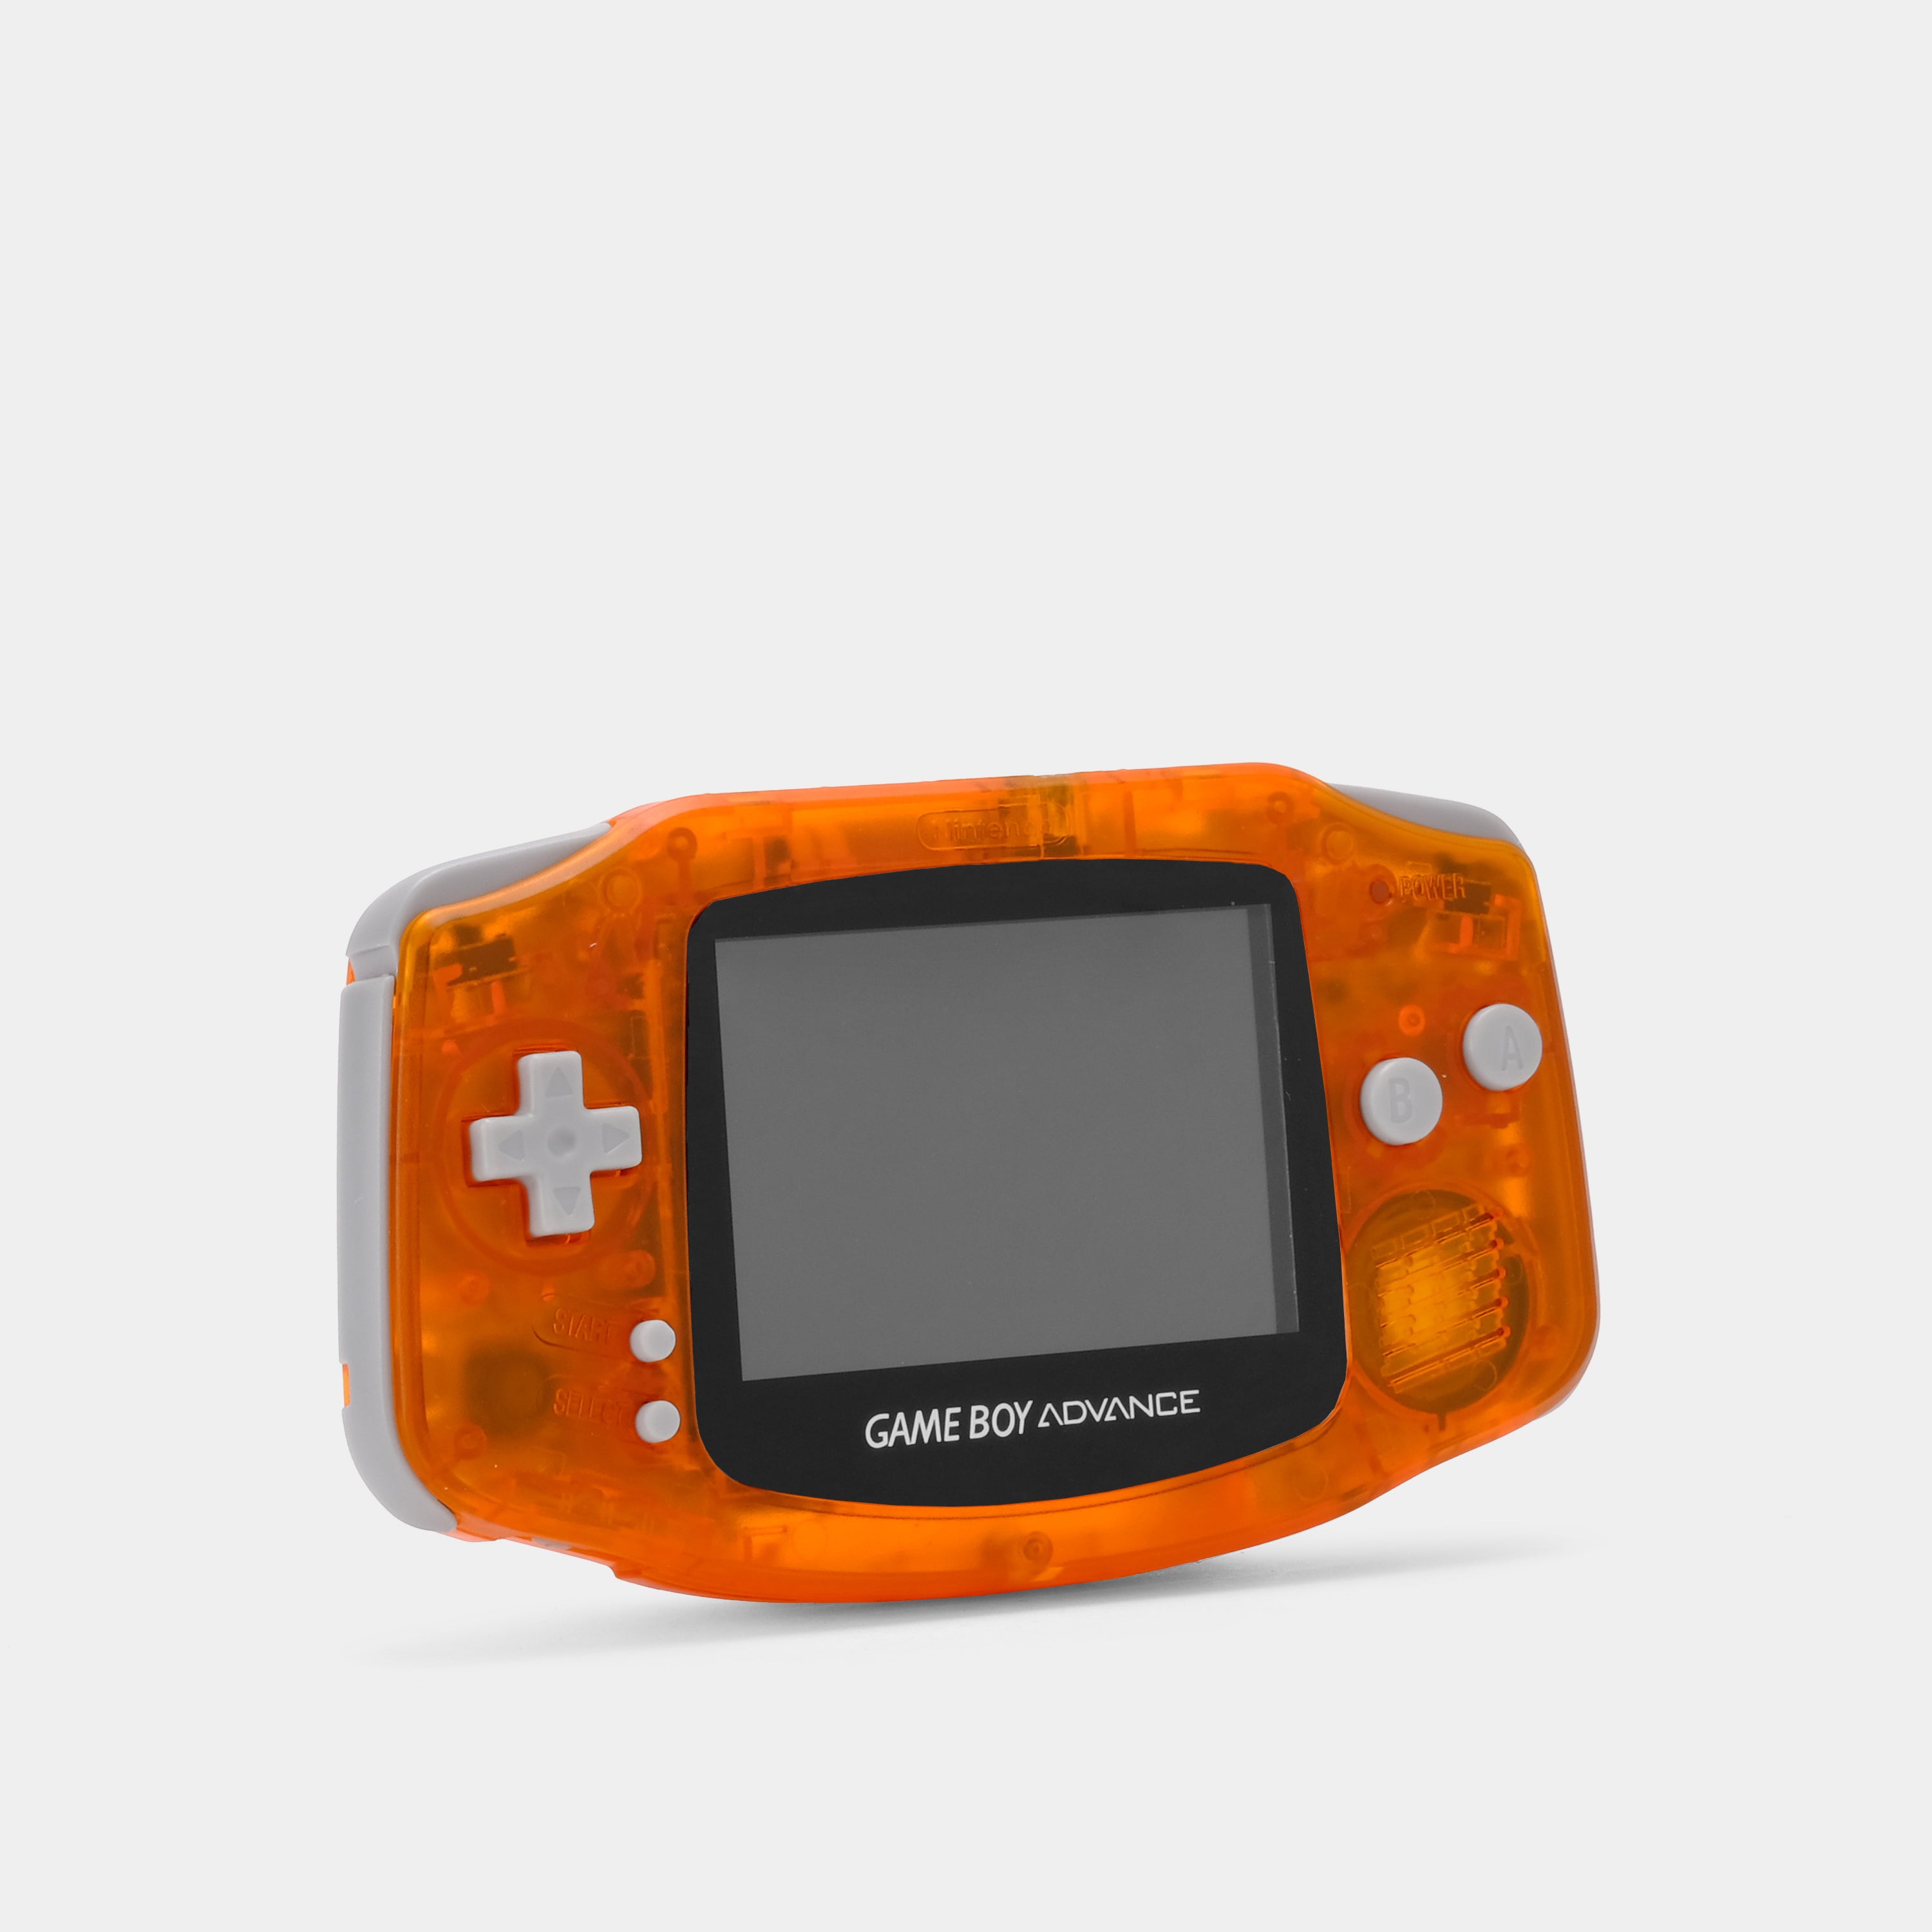 Nintendo Game Boy Advance Transparent Orange Game Console With Backlit Screen